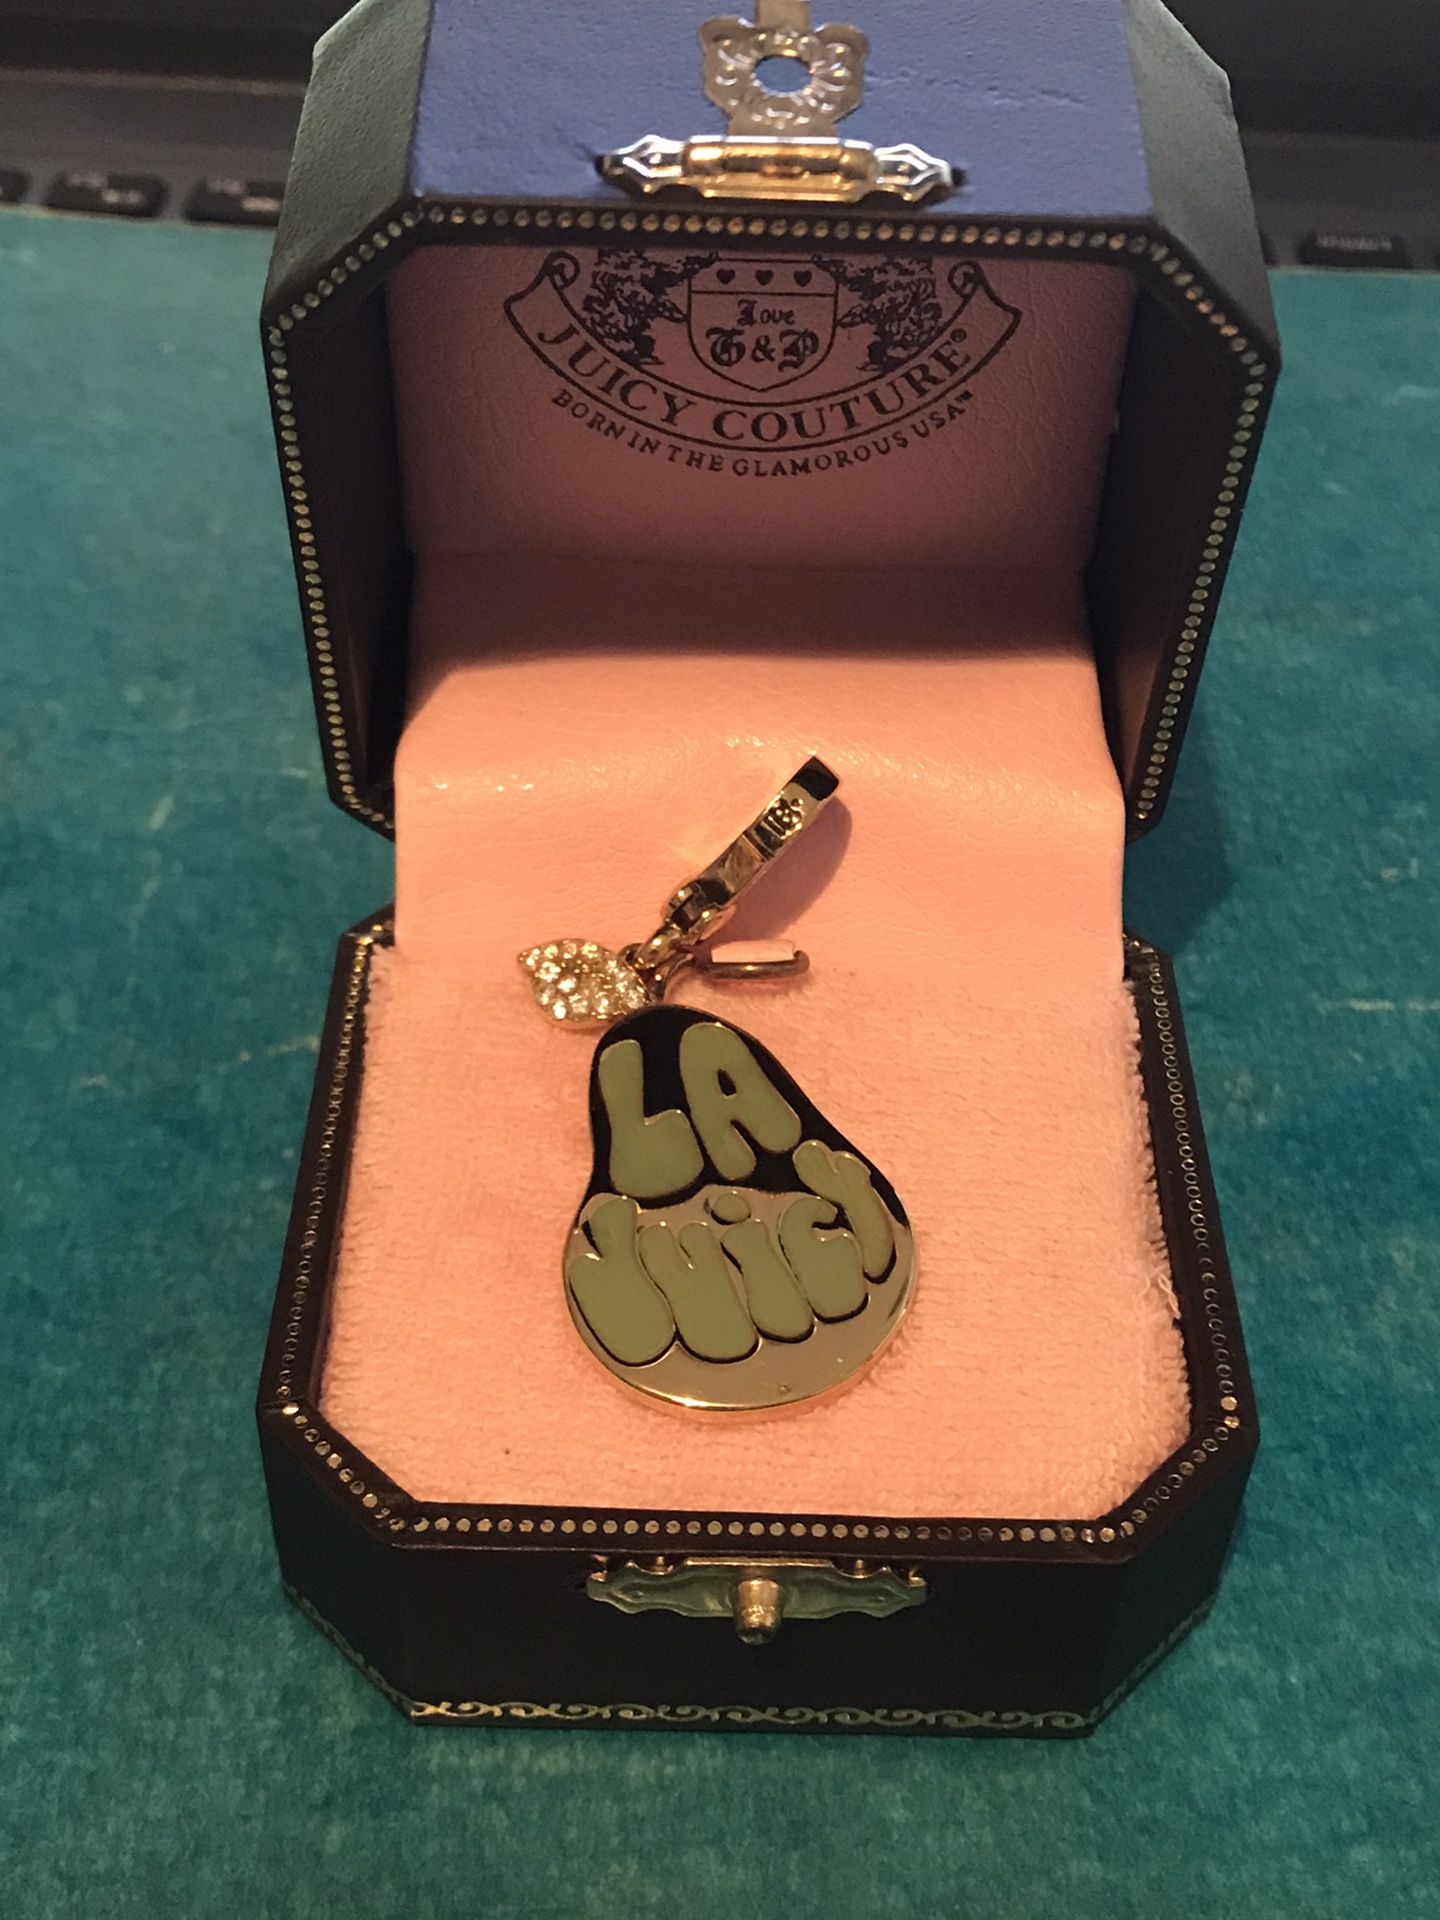 Juicy Couture Pear Necklace/Charm